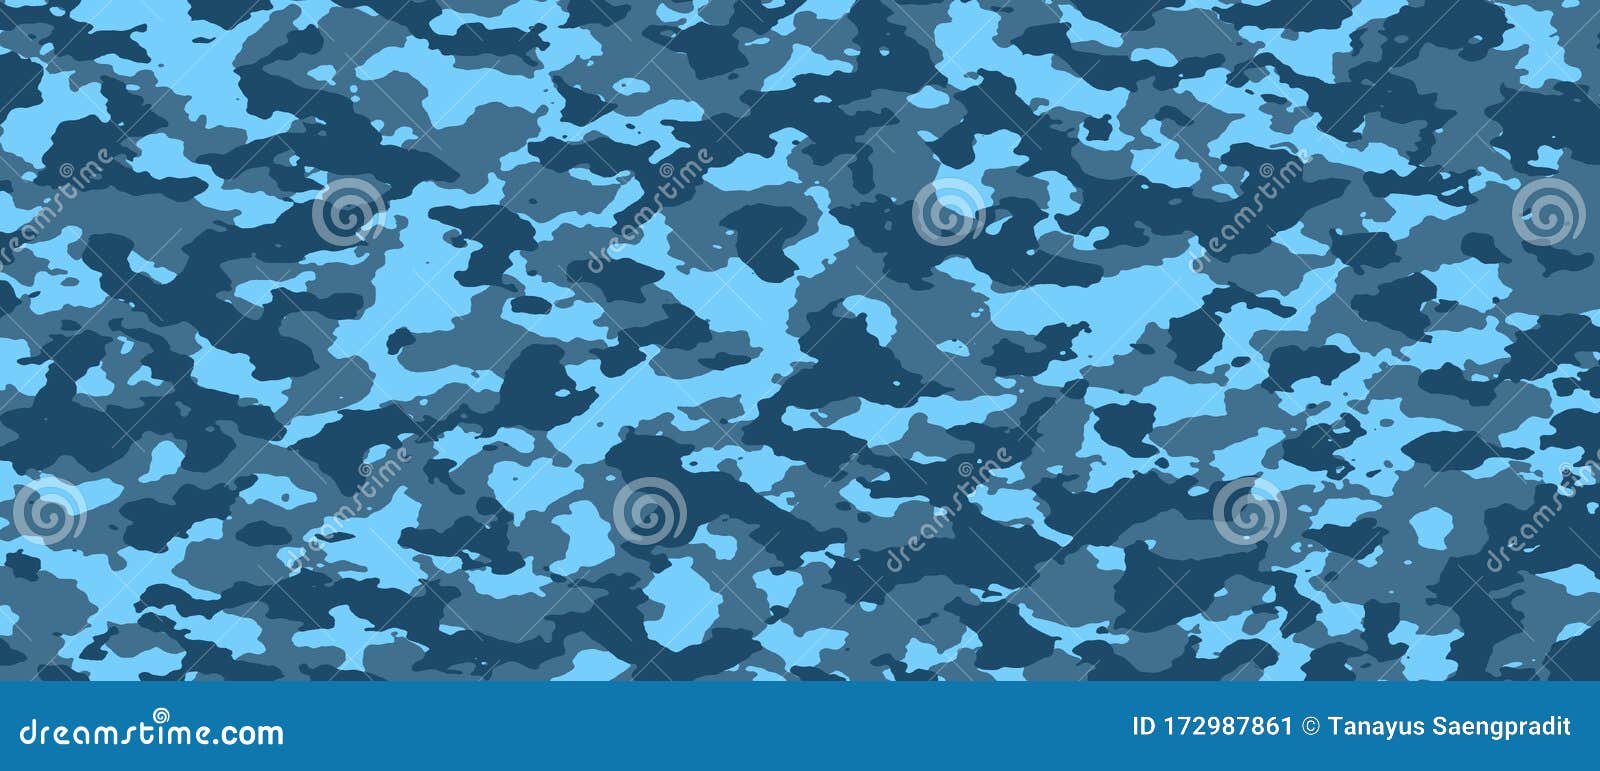 Download wallpapers blue camouflage 4k military camouflage blue  camouflage background camouflage pattern camouflage textures camouflage  backgrounds winter camouflage for desktop free Pictures for desktop free